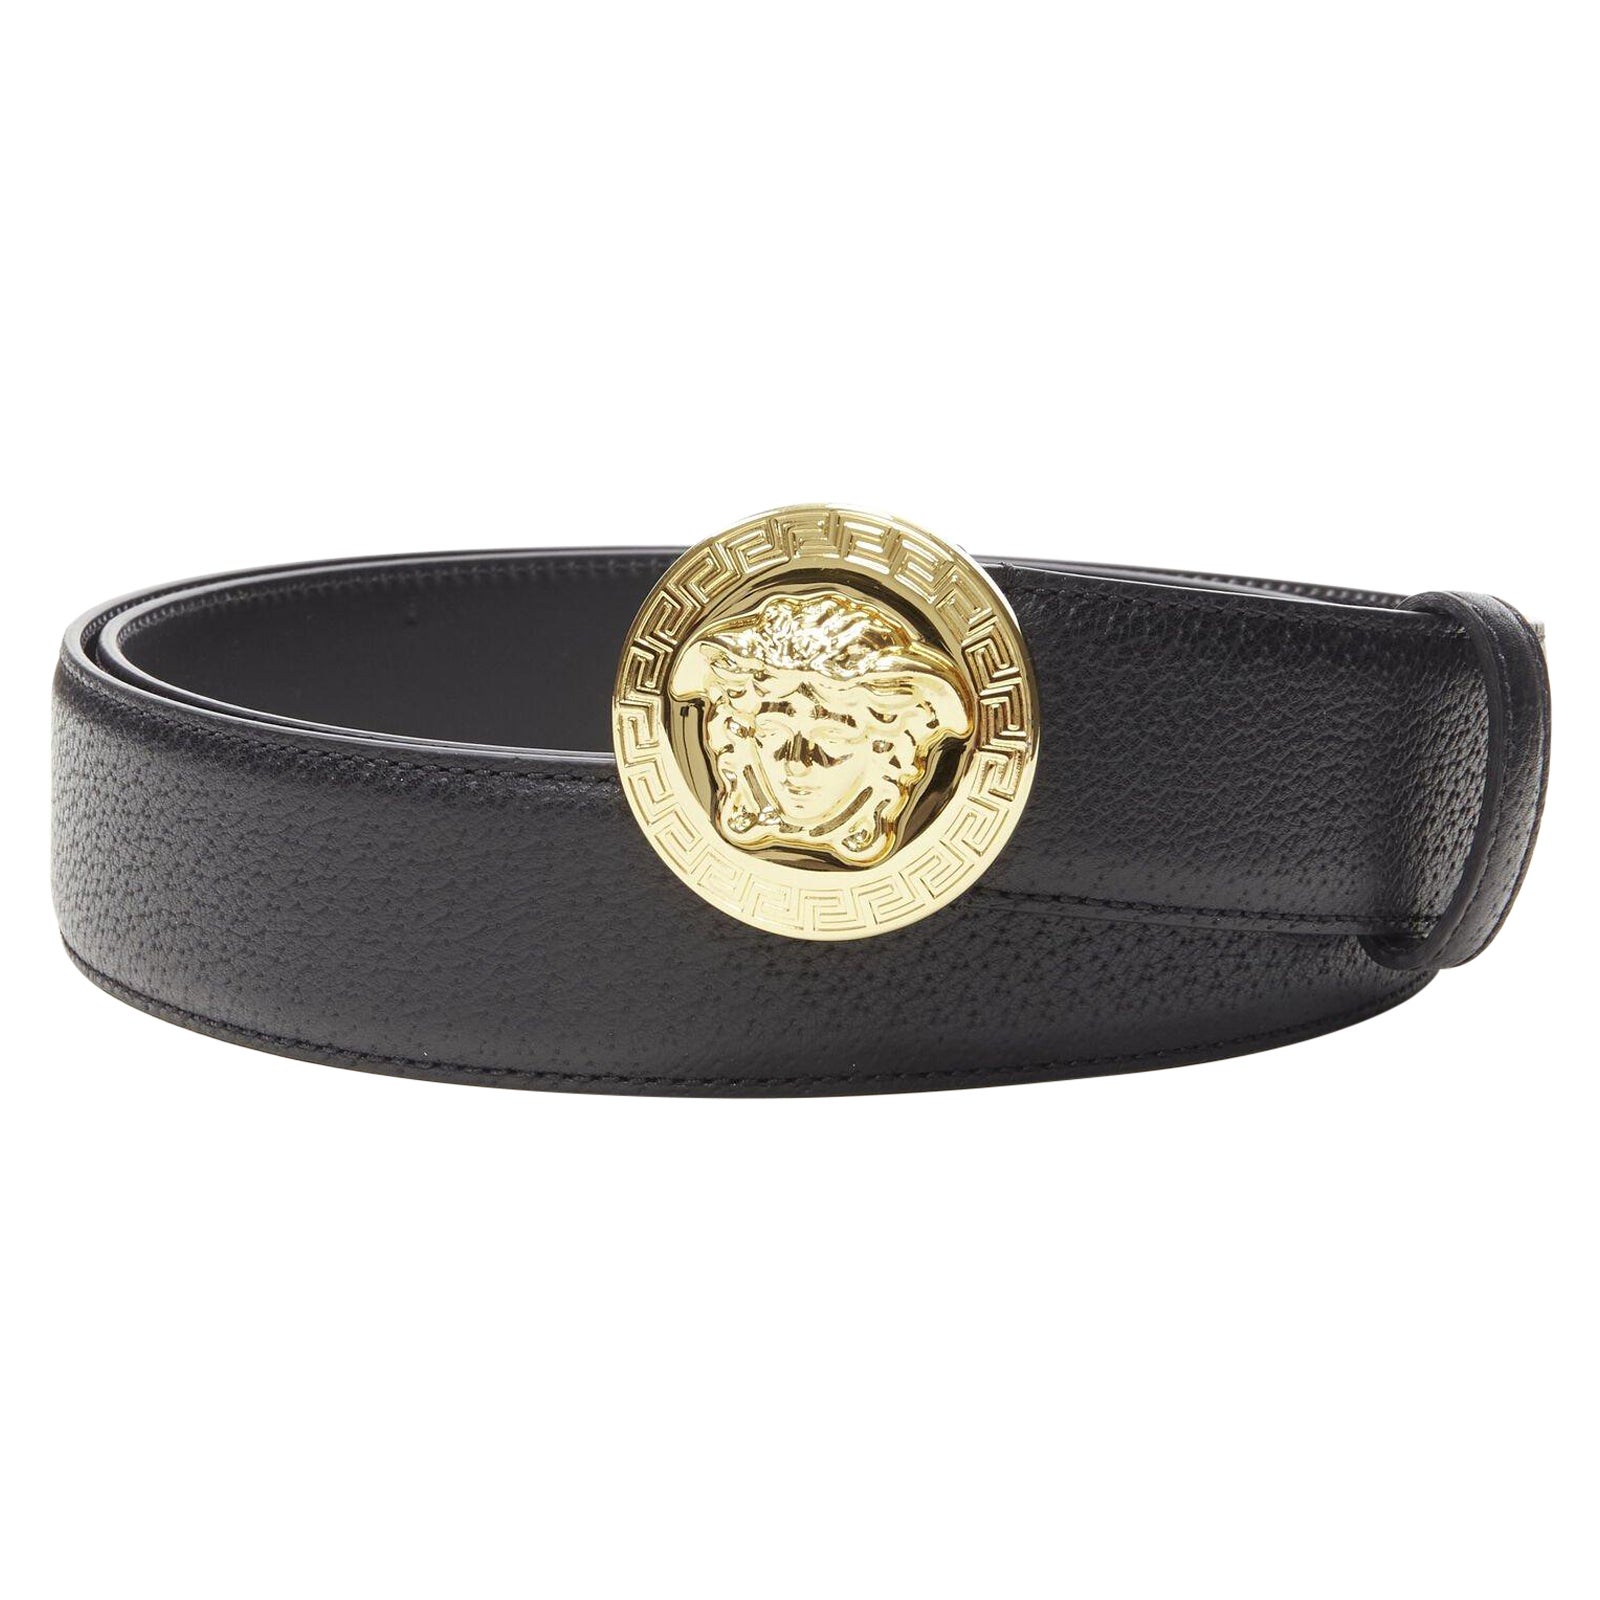 How can I tell if a Versace belt is real?